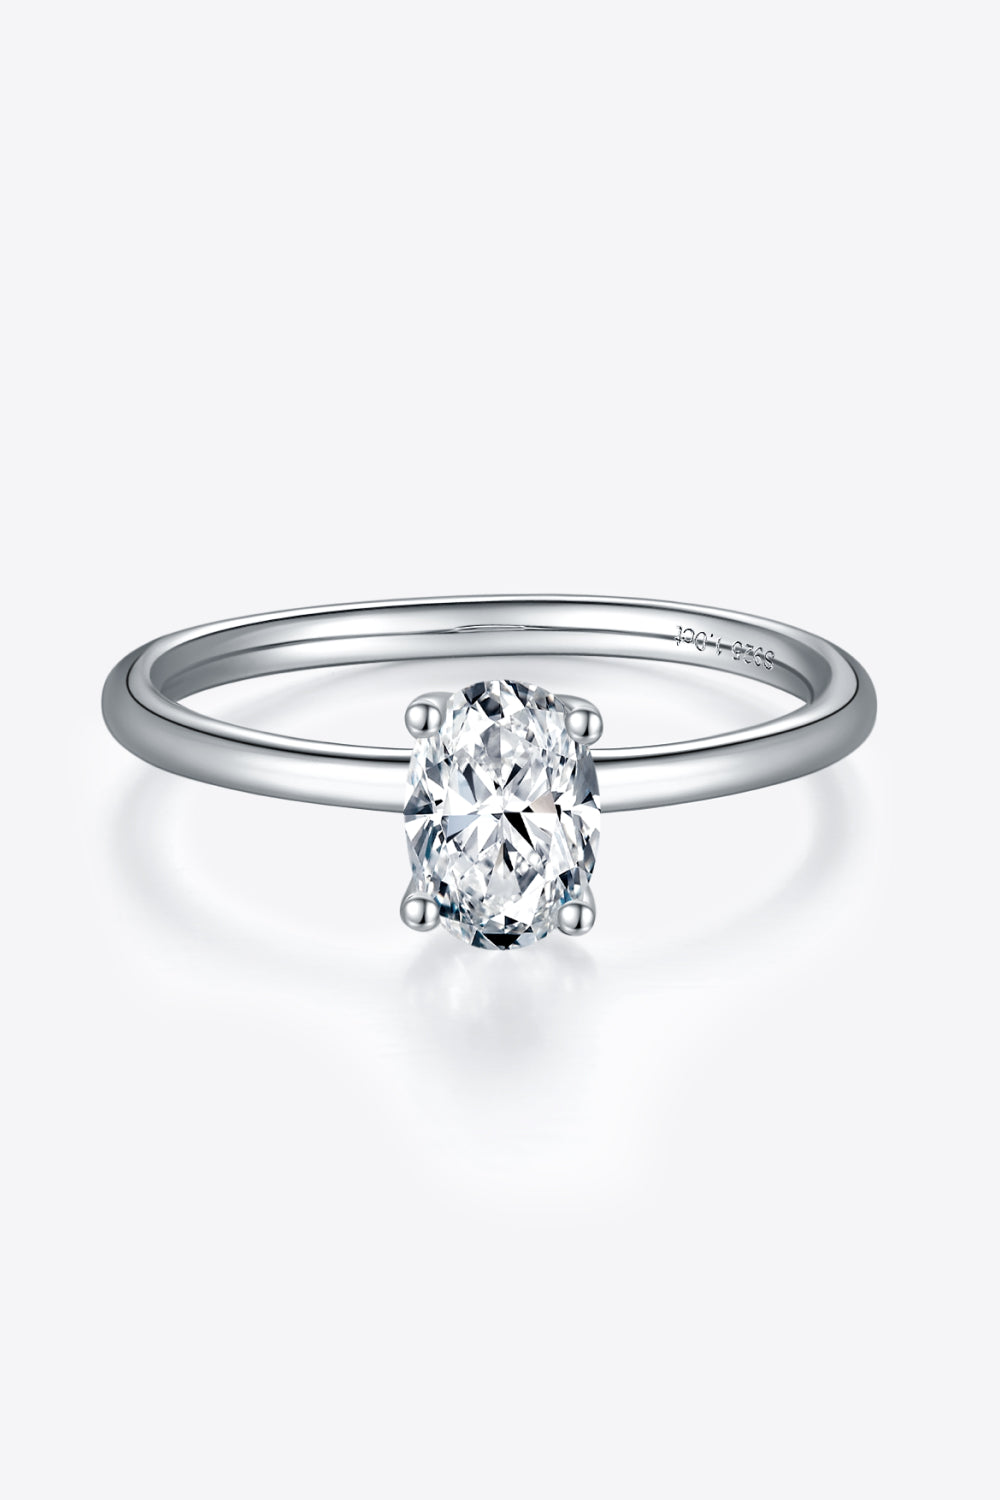 1 Carat Moissanite 925 Sterling Silver Solitaire Ring